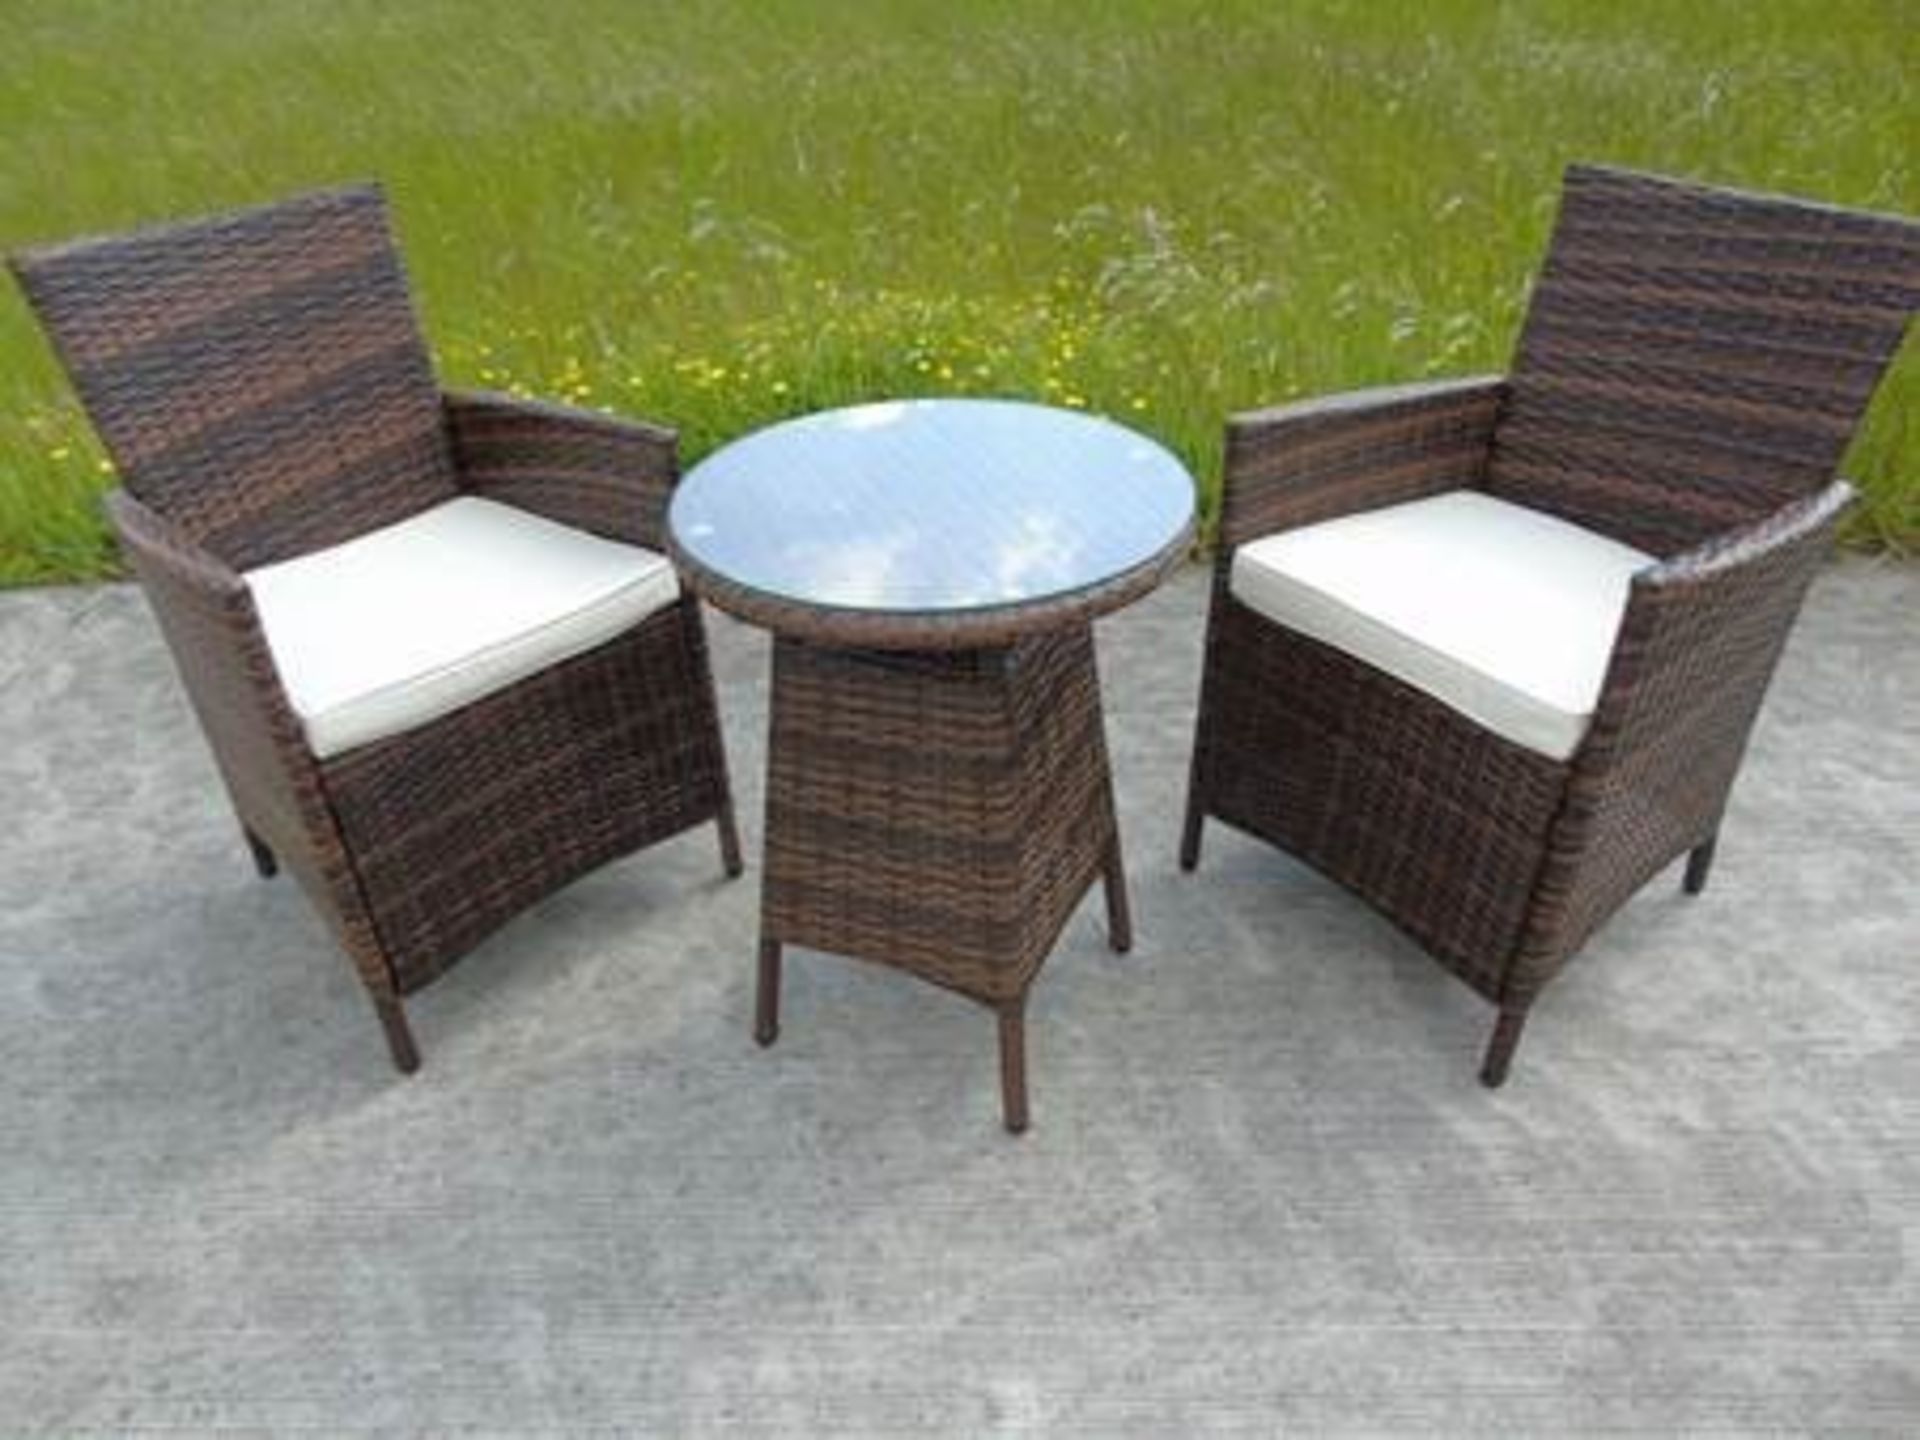 + VAT Brand New Chelsea Garden Company Two Person Dining Set - Item Is Available From Approx 31st